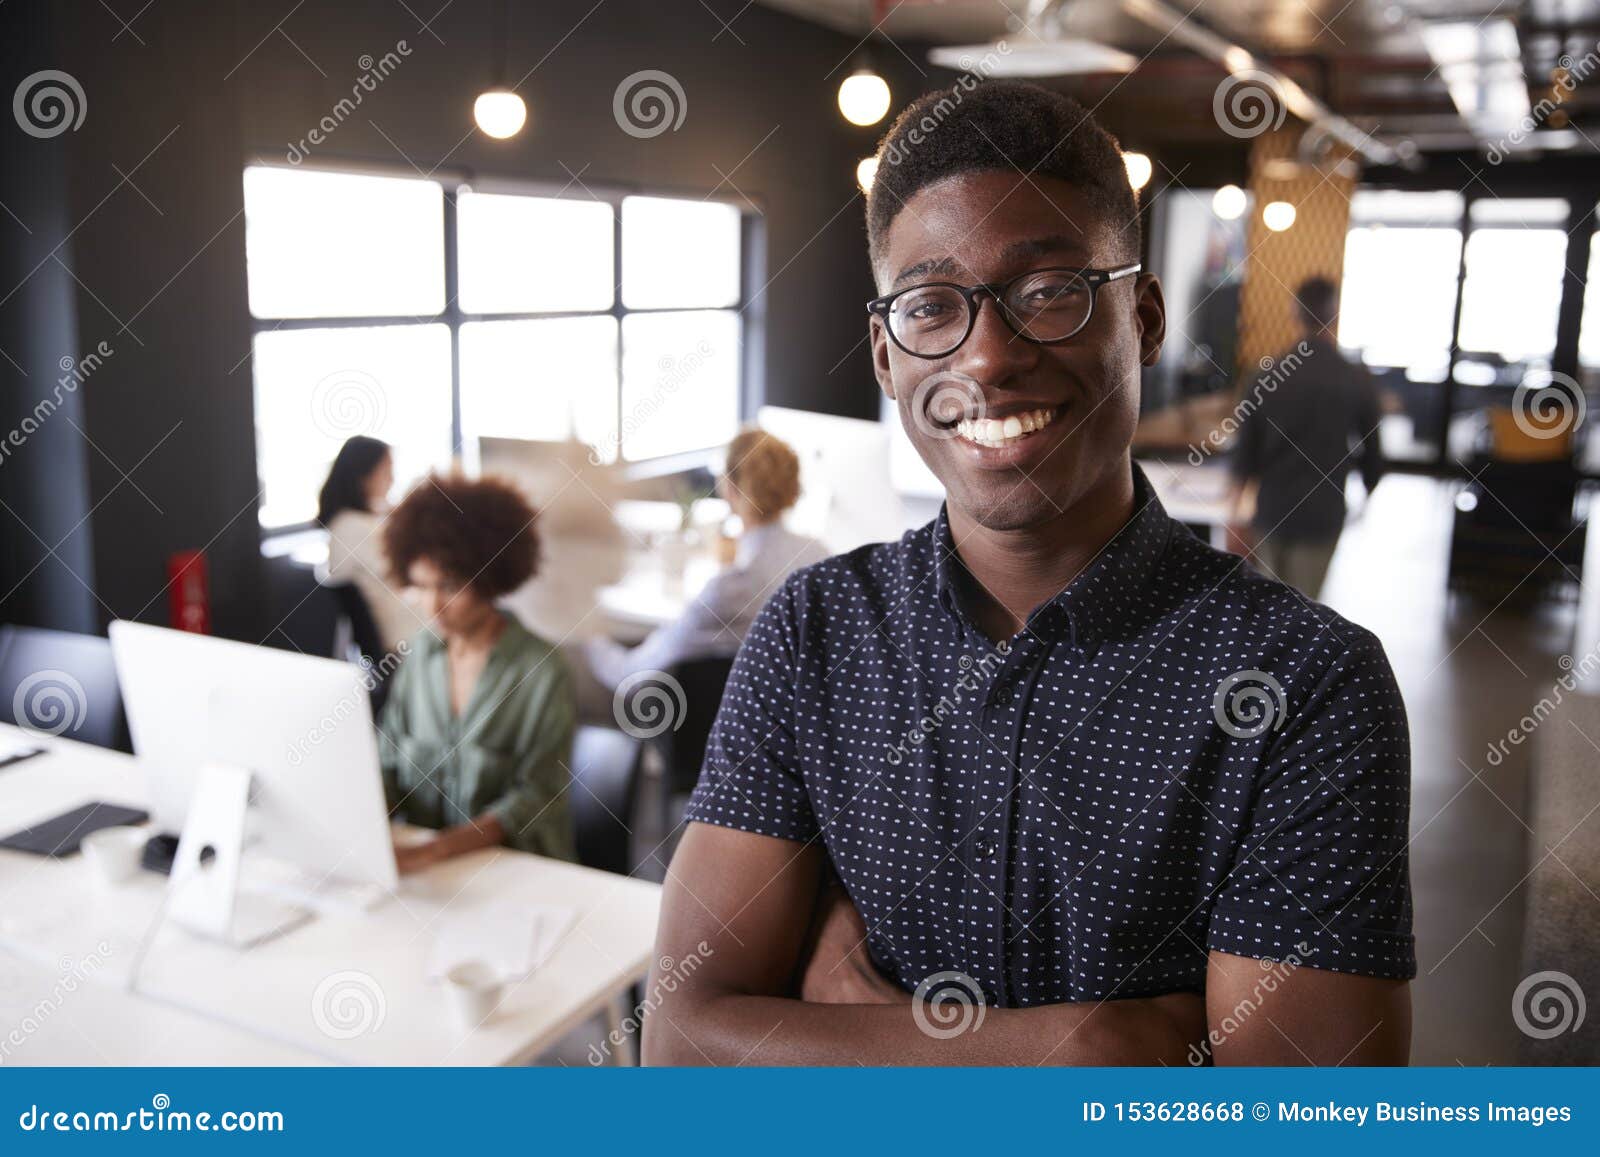 millennial black male creative standing in a busy casual office, smiling to camera